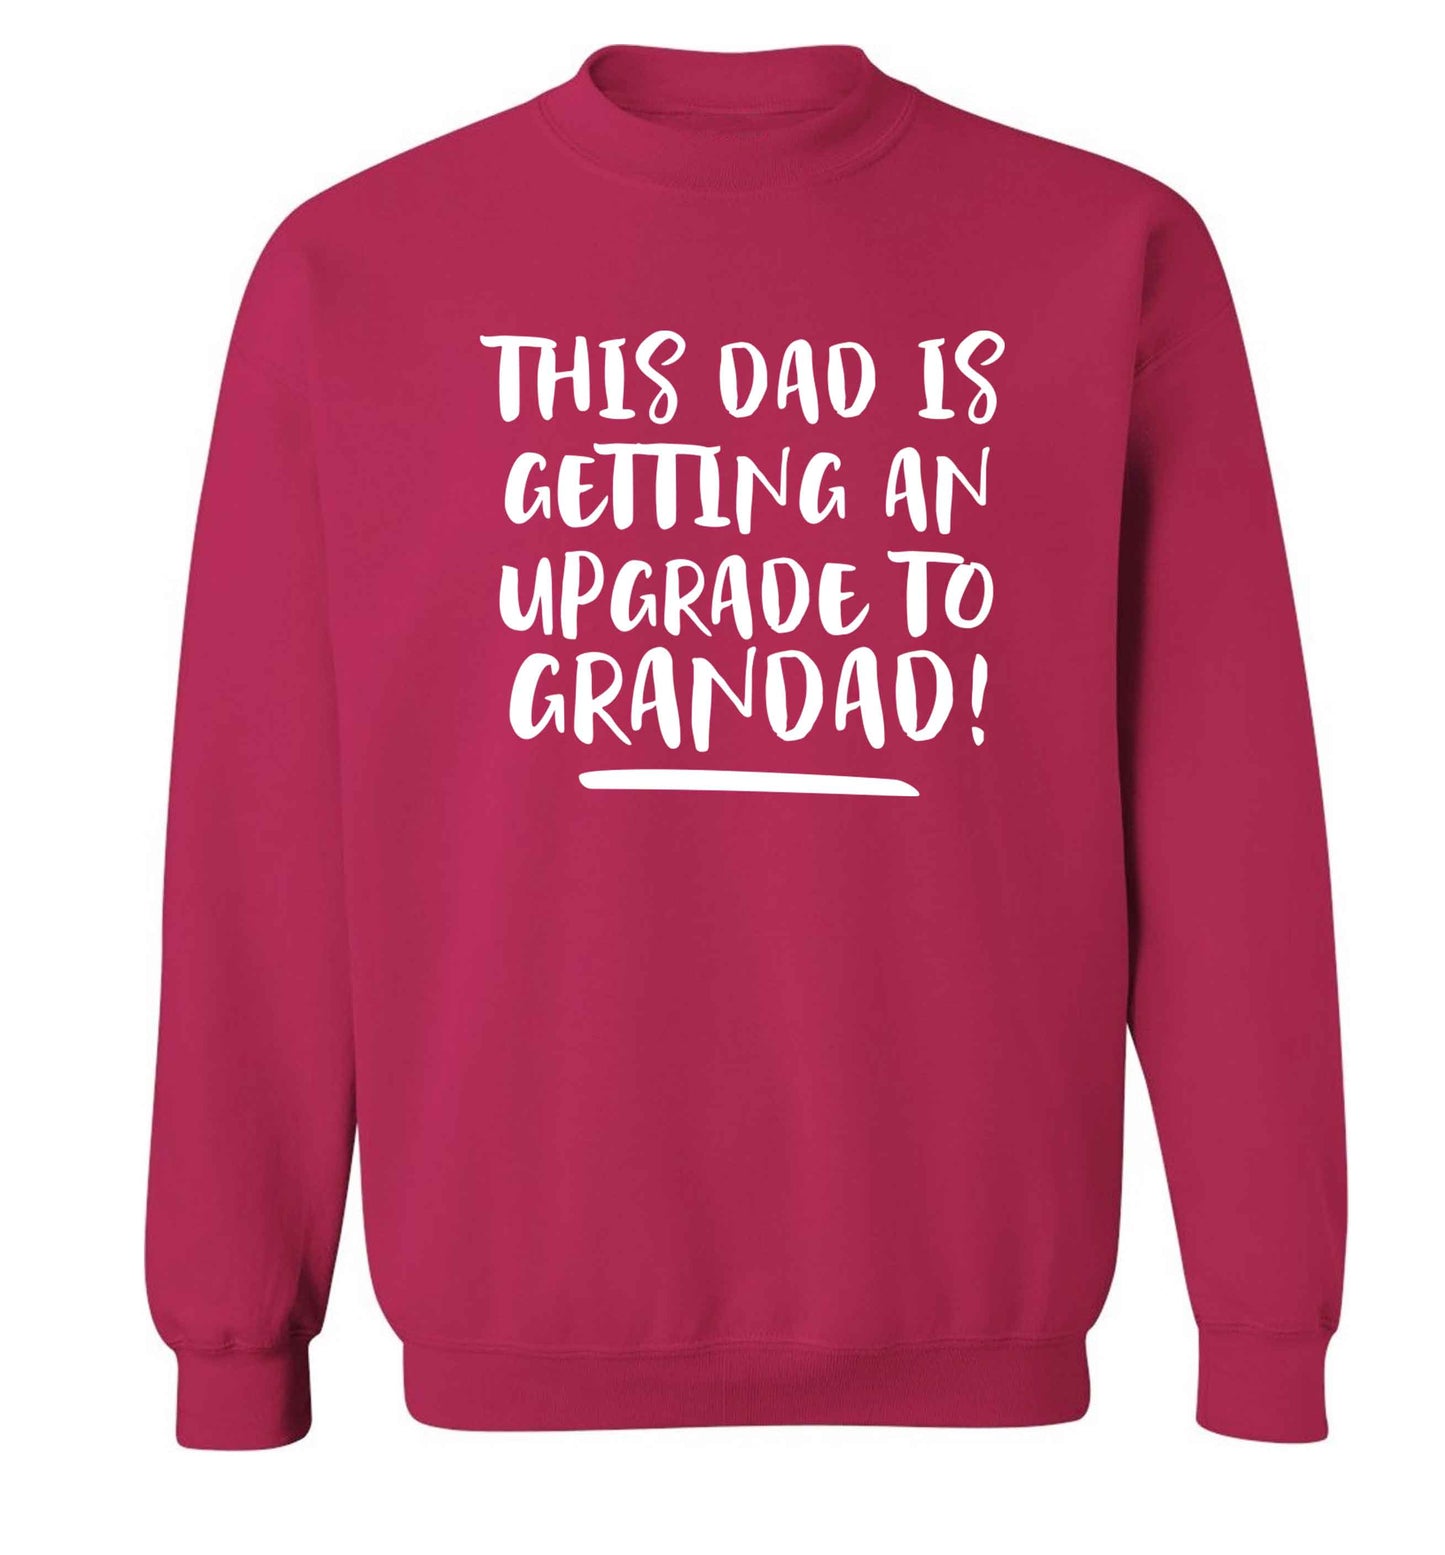 This dad is getting an upgrade to grandad! Adult's unisex pink Sweater 2XL